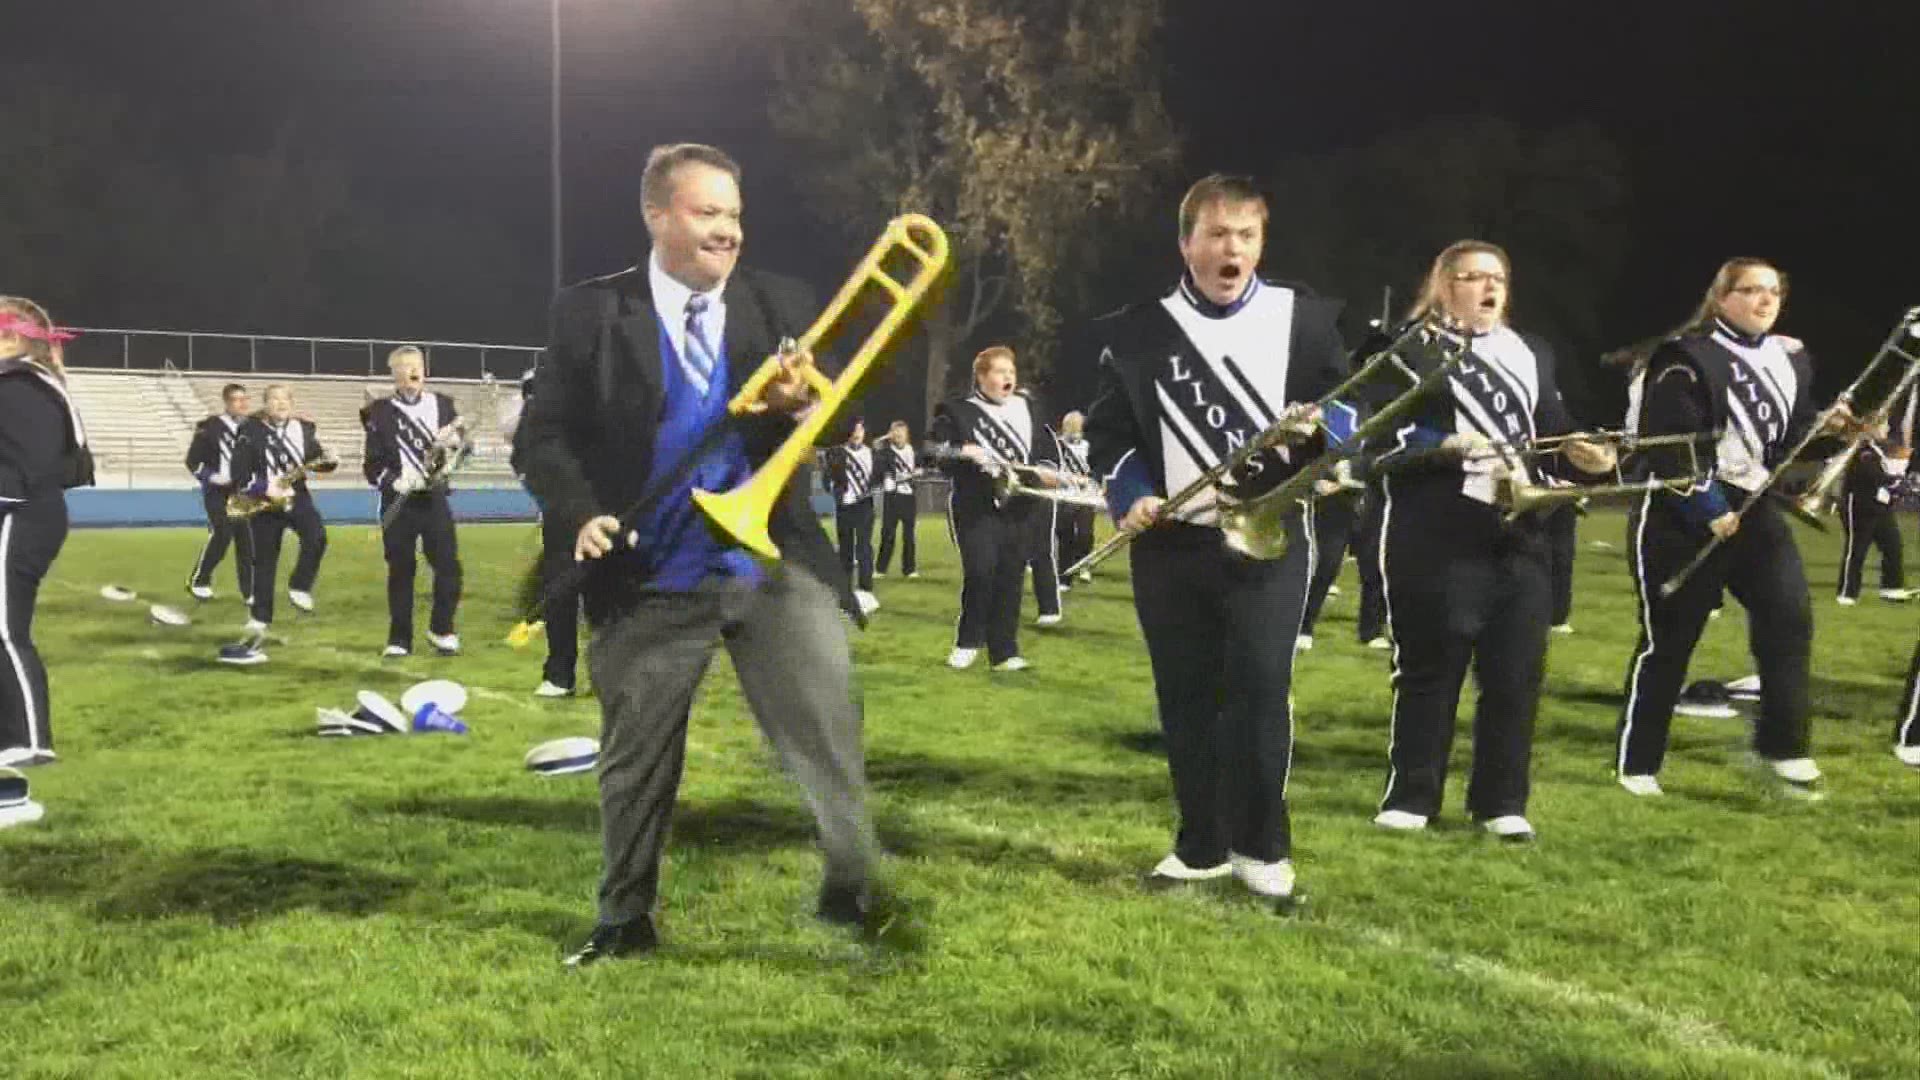 Matt Stanley is the Director of Bands at Washington High School, and he is this week's Classroom Hero.